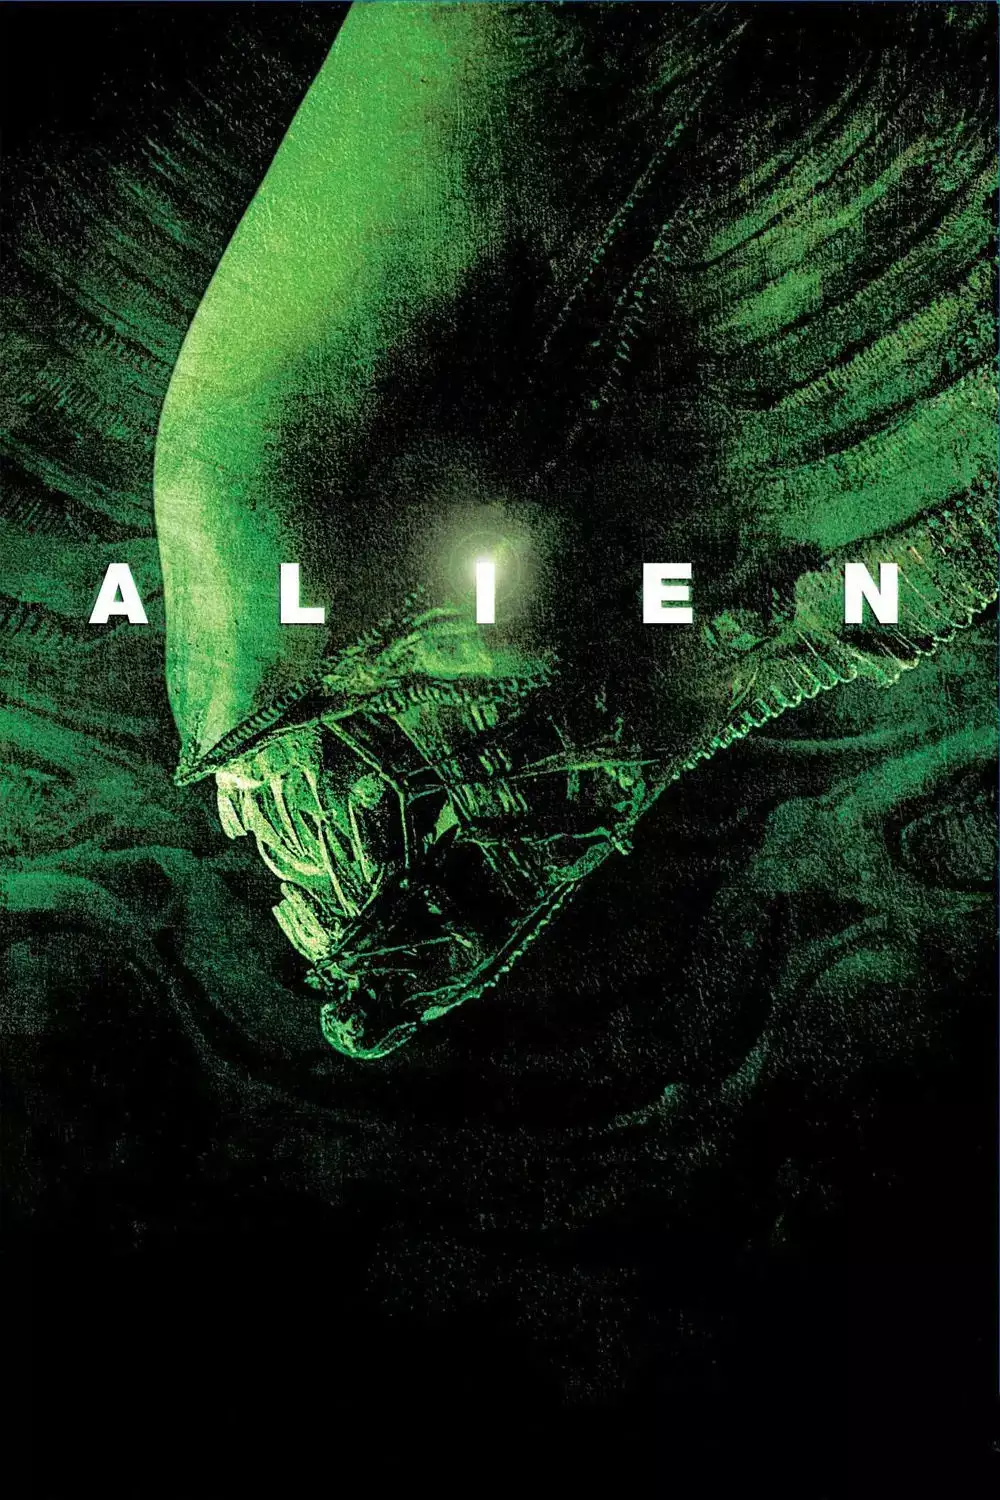 The preliminary work of the TV series ＂Alien＂ will be explored in -depth exploration of humanity broadcast articles